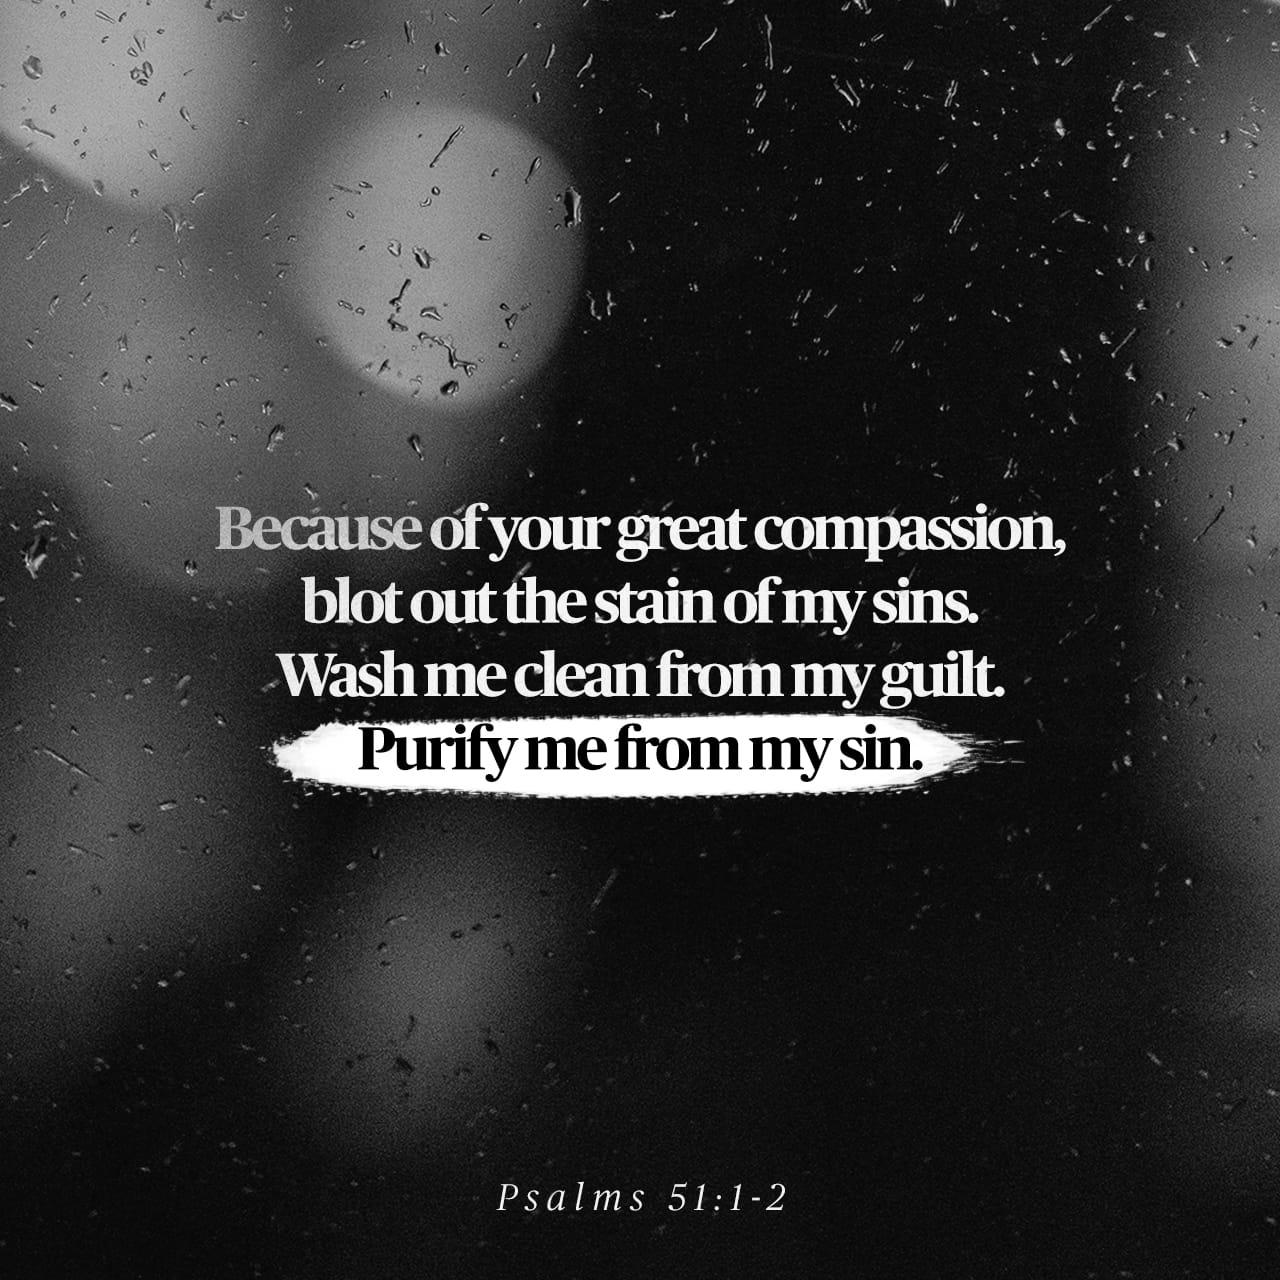 Bible Verse of the Day - day 91 - image 13747 (Psalms 51:1-19)